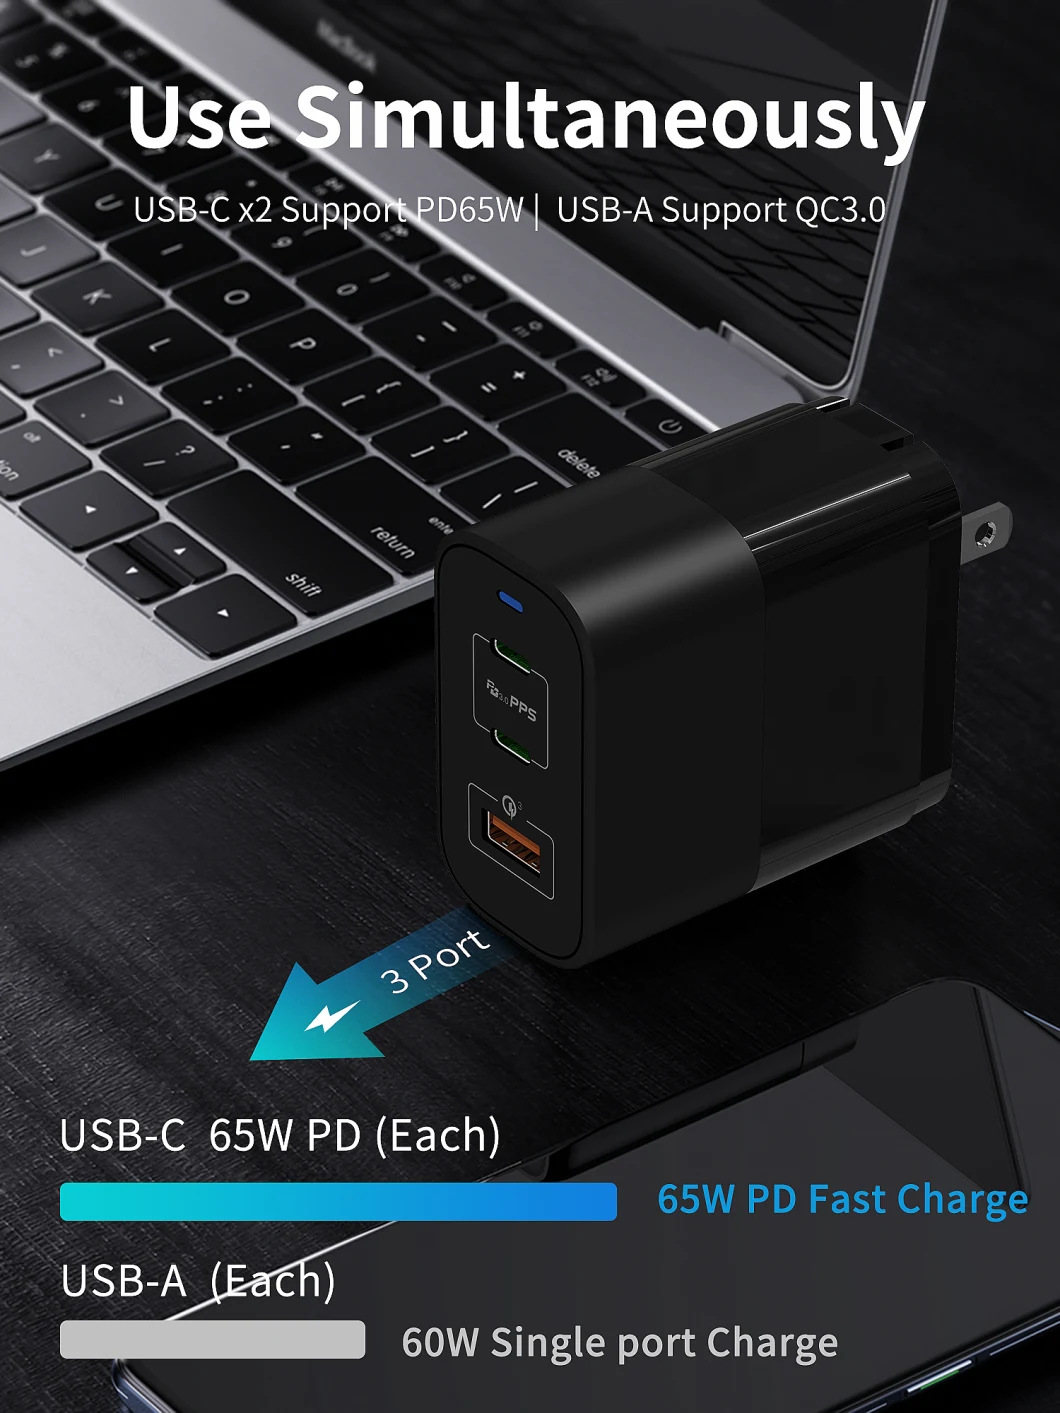 CE RoHS Kc Hot Pd QC3.0 3 Port Charger USB C Quick Charge Fast USB Charger EU UK Kr Pin Pd GaN Adapter 65W GaN Charger